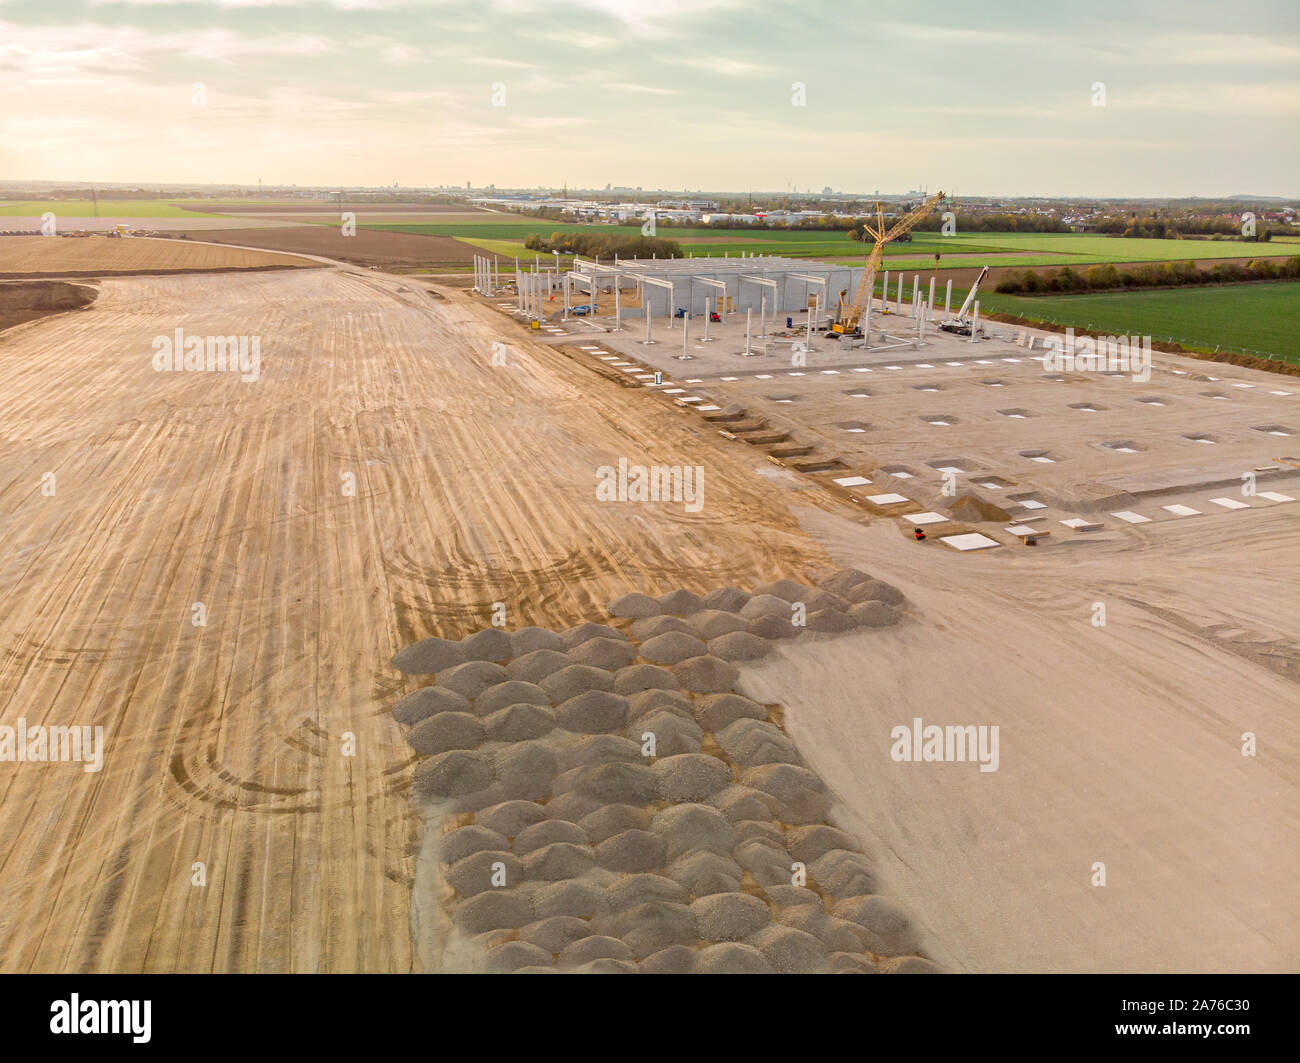 Aerial view - Construction site of a new industrial area in the country Stock Photo